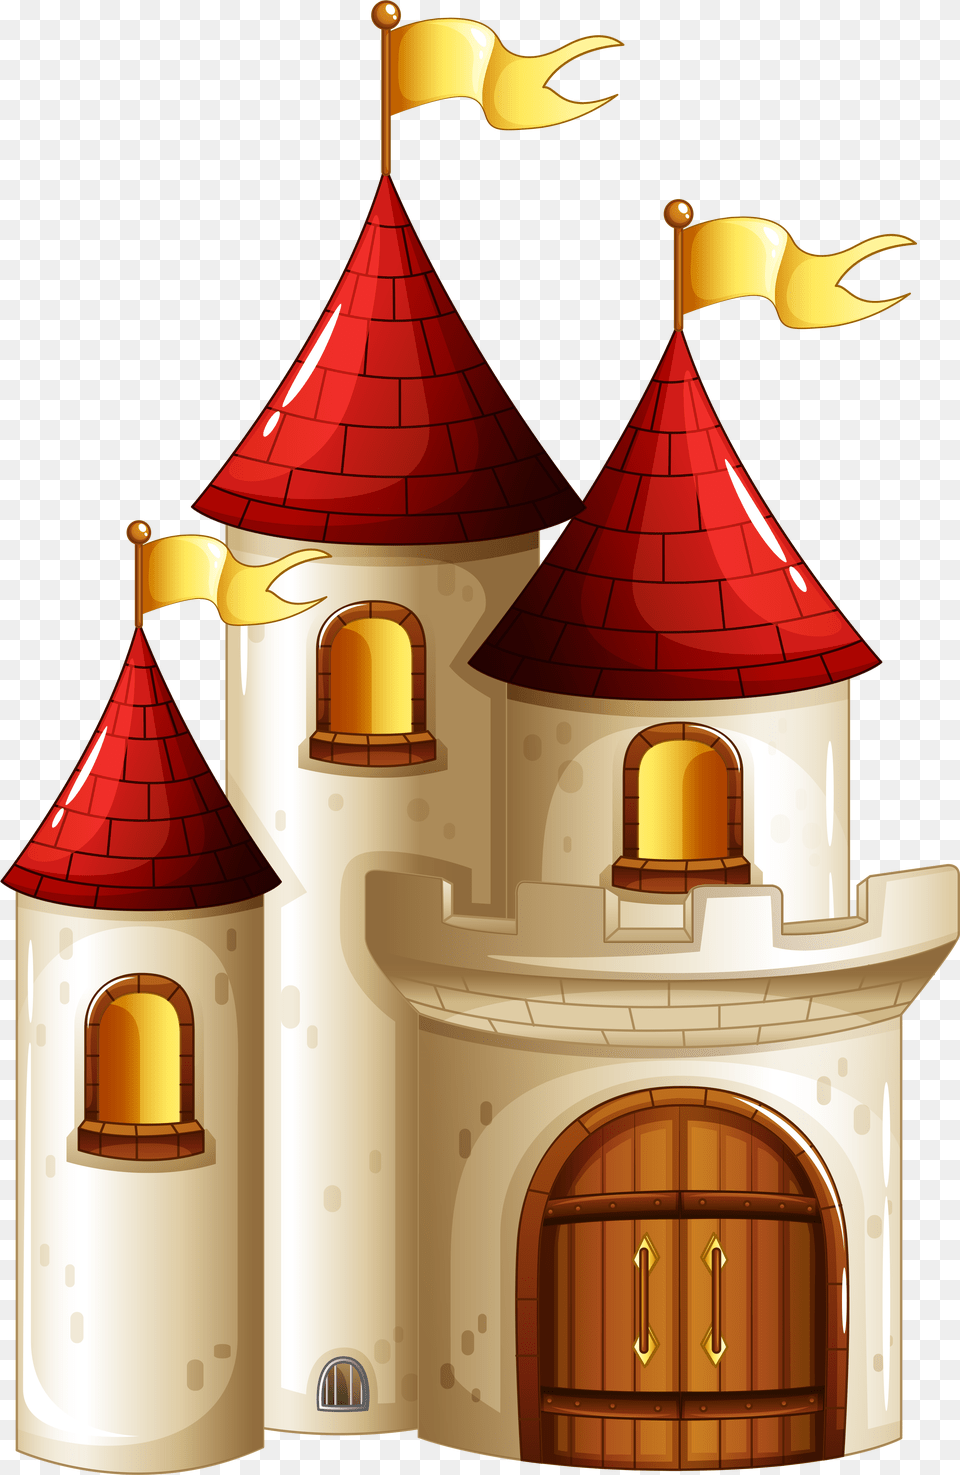 Castle Clip Art, Architecture, Bell Tower, Building, Tower Png